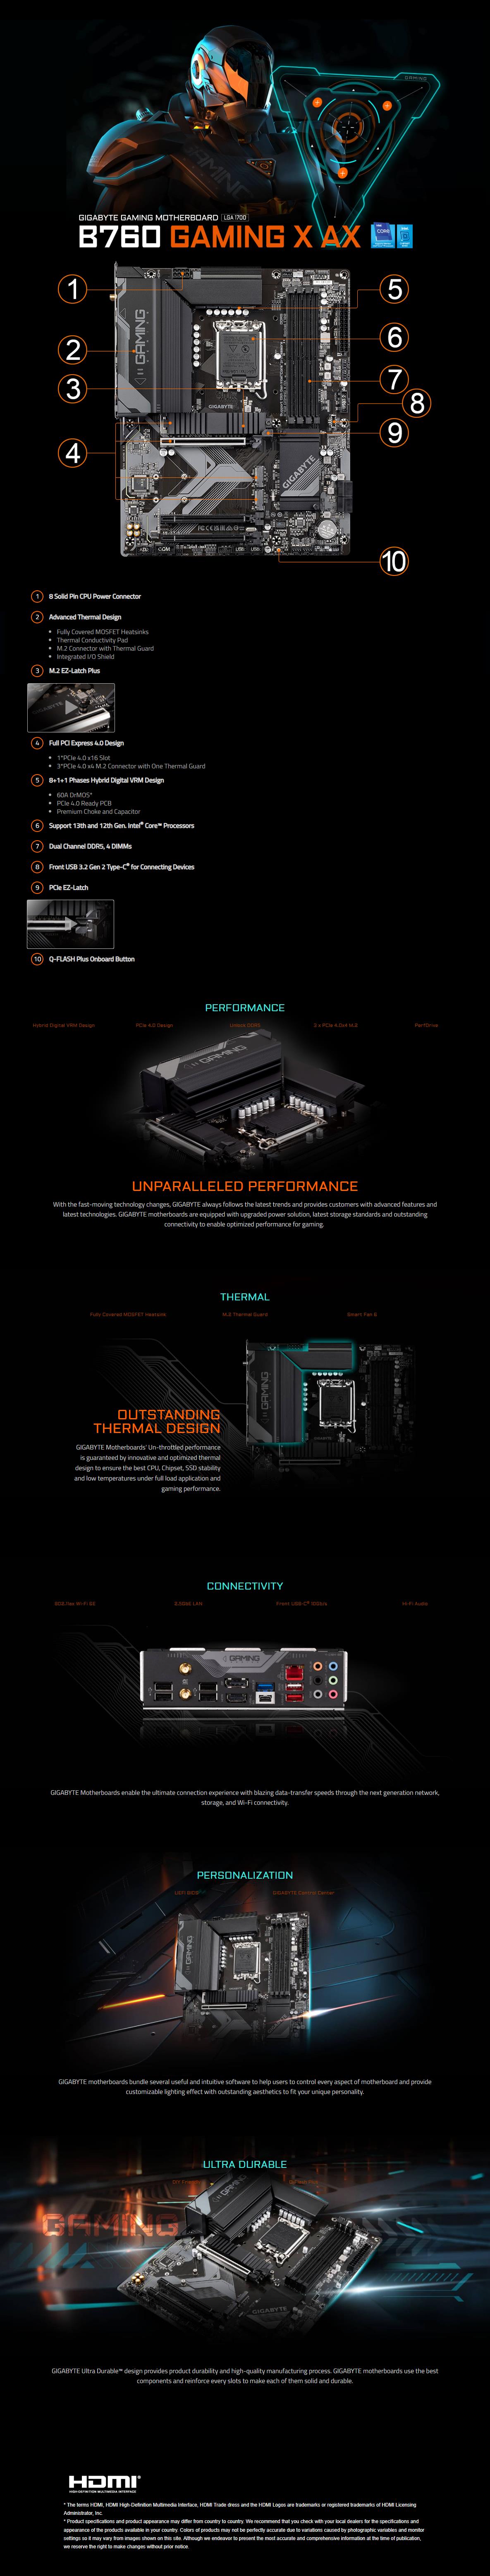 A large marketing image providing additional information about the product Gigabyte B760 Gaming X AX LGA1700 ATX Desktop Motherboard - Additional alt info not provided